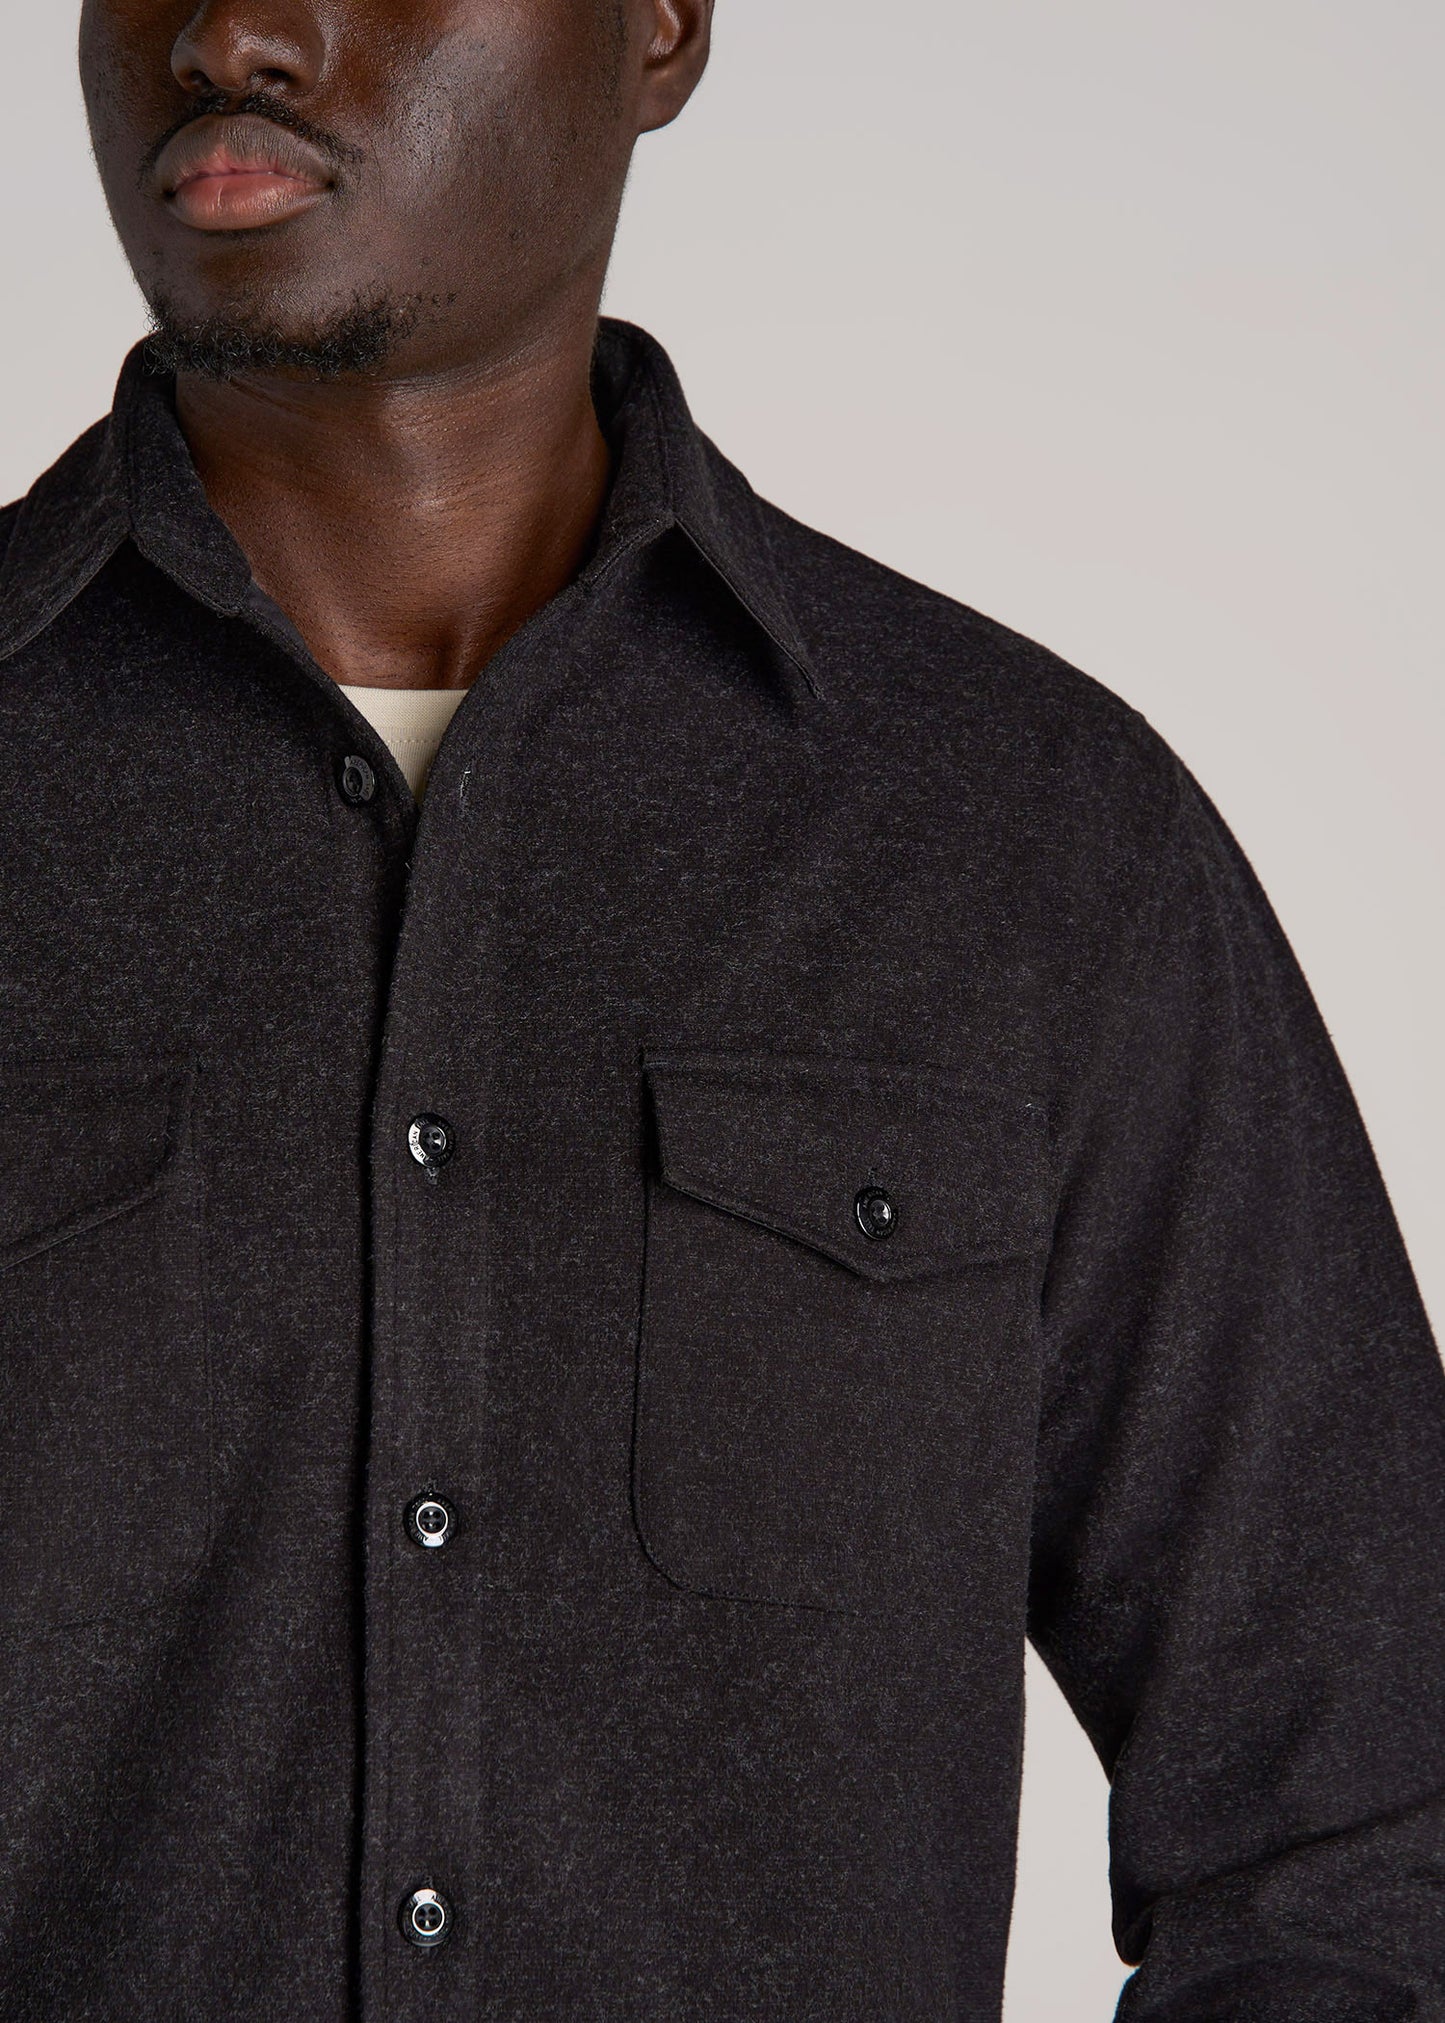 Stretch Knit Overshirt for Tall Men in Black